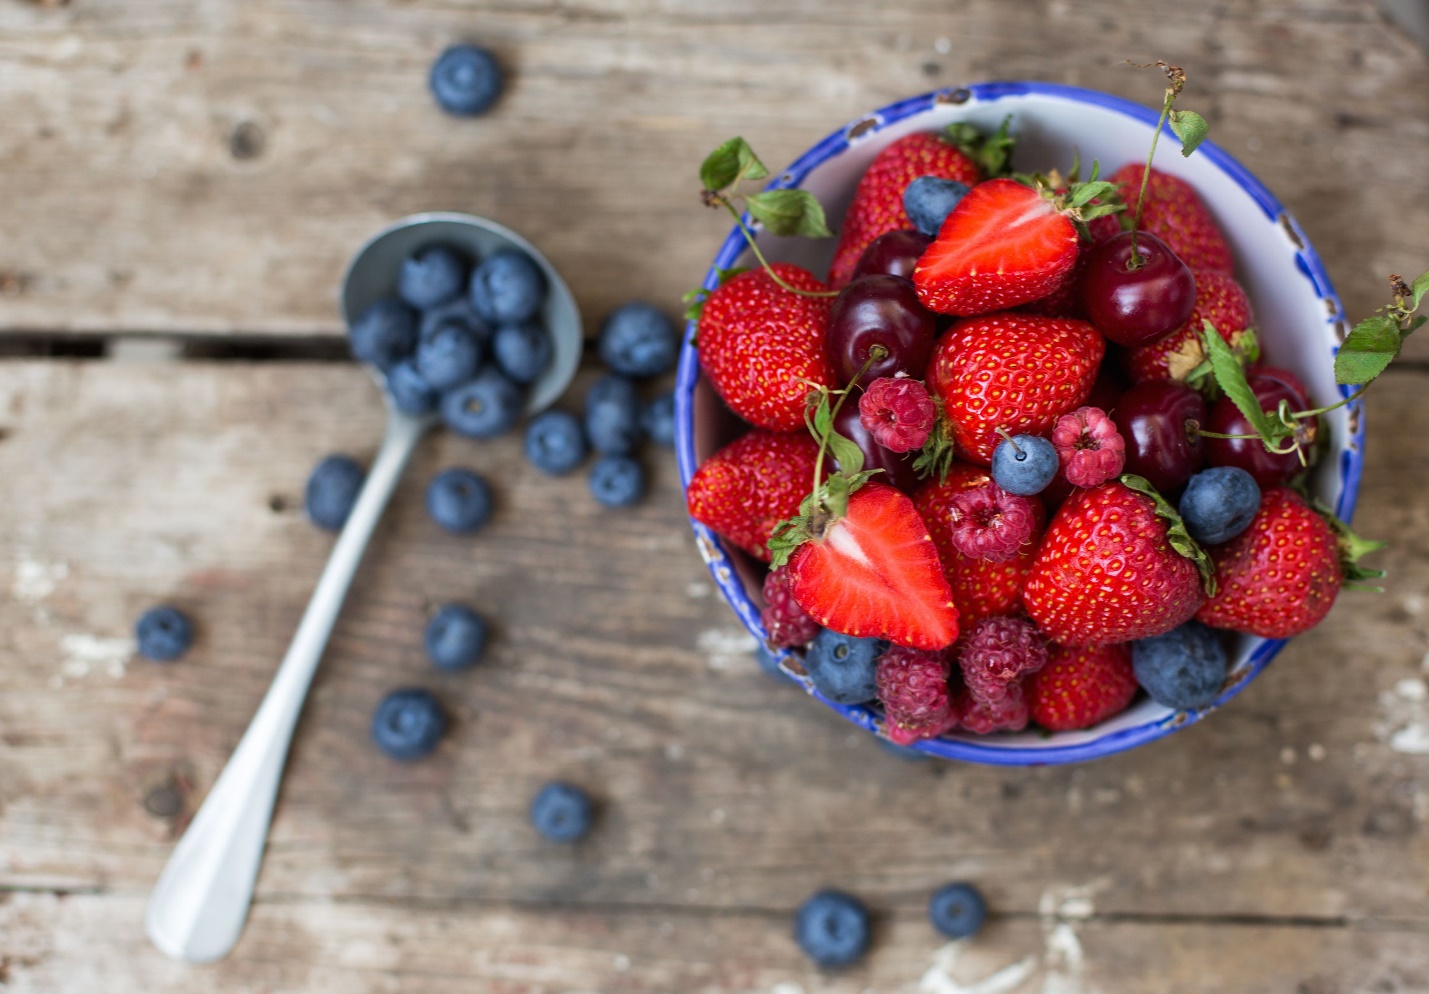 Berries are known to be one of the best cancer-fighting foods